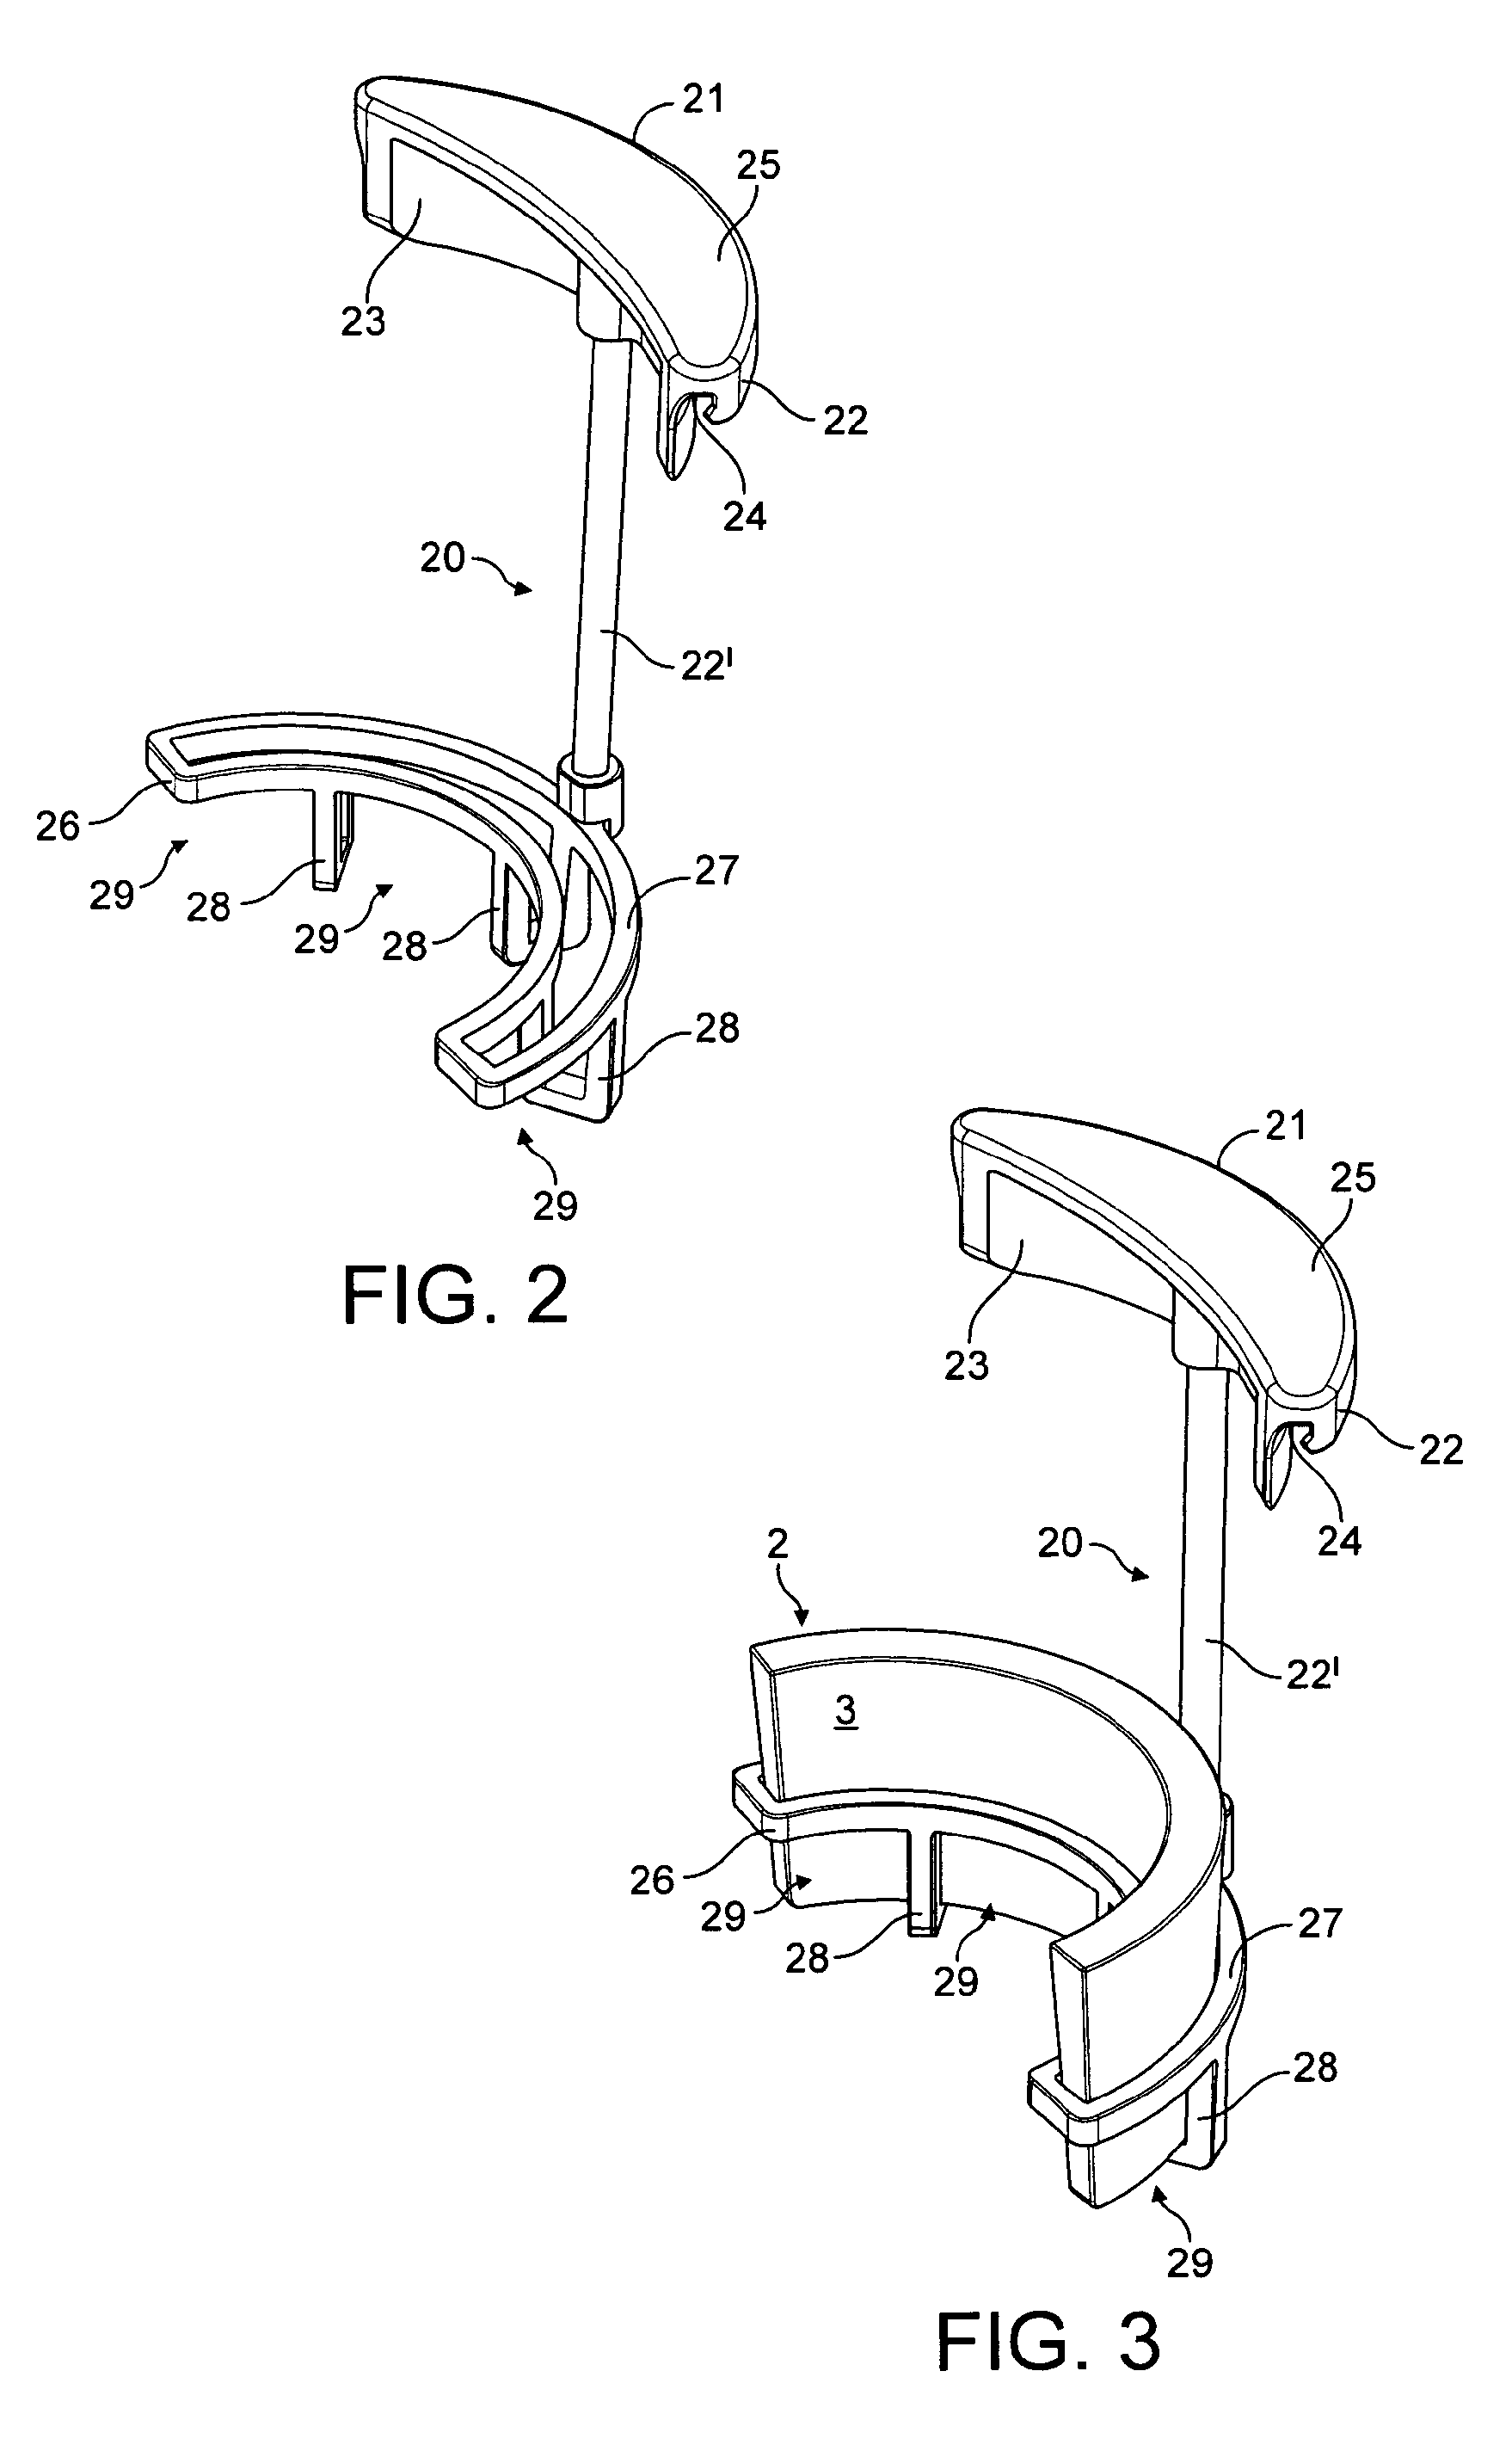 Arrangement for mixing a flavouring ingredient with a liquid carrier